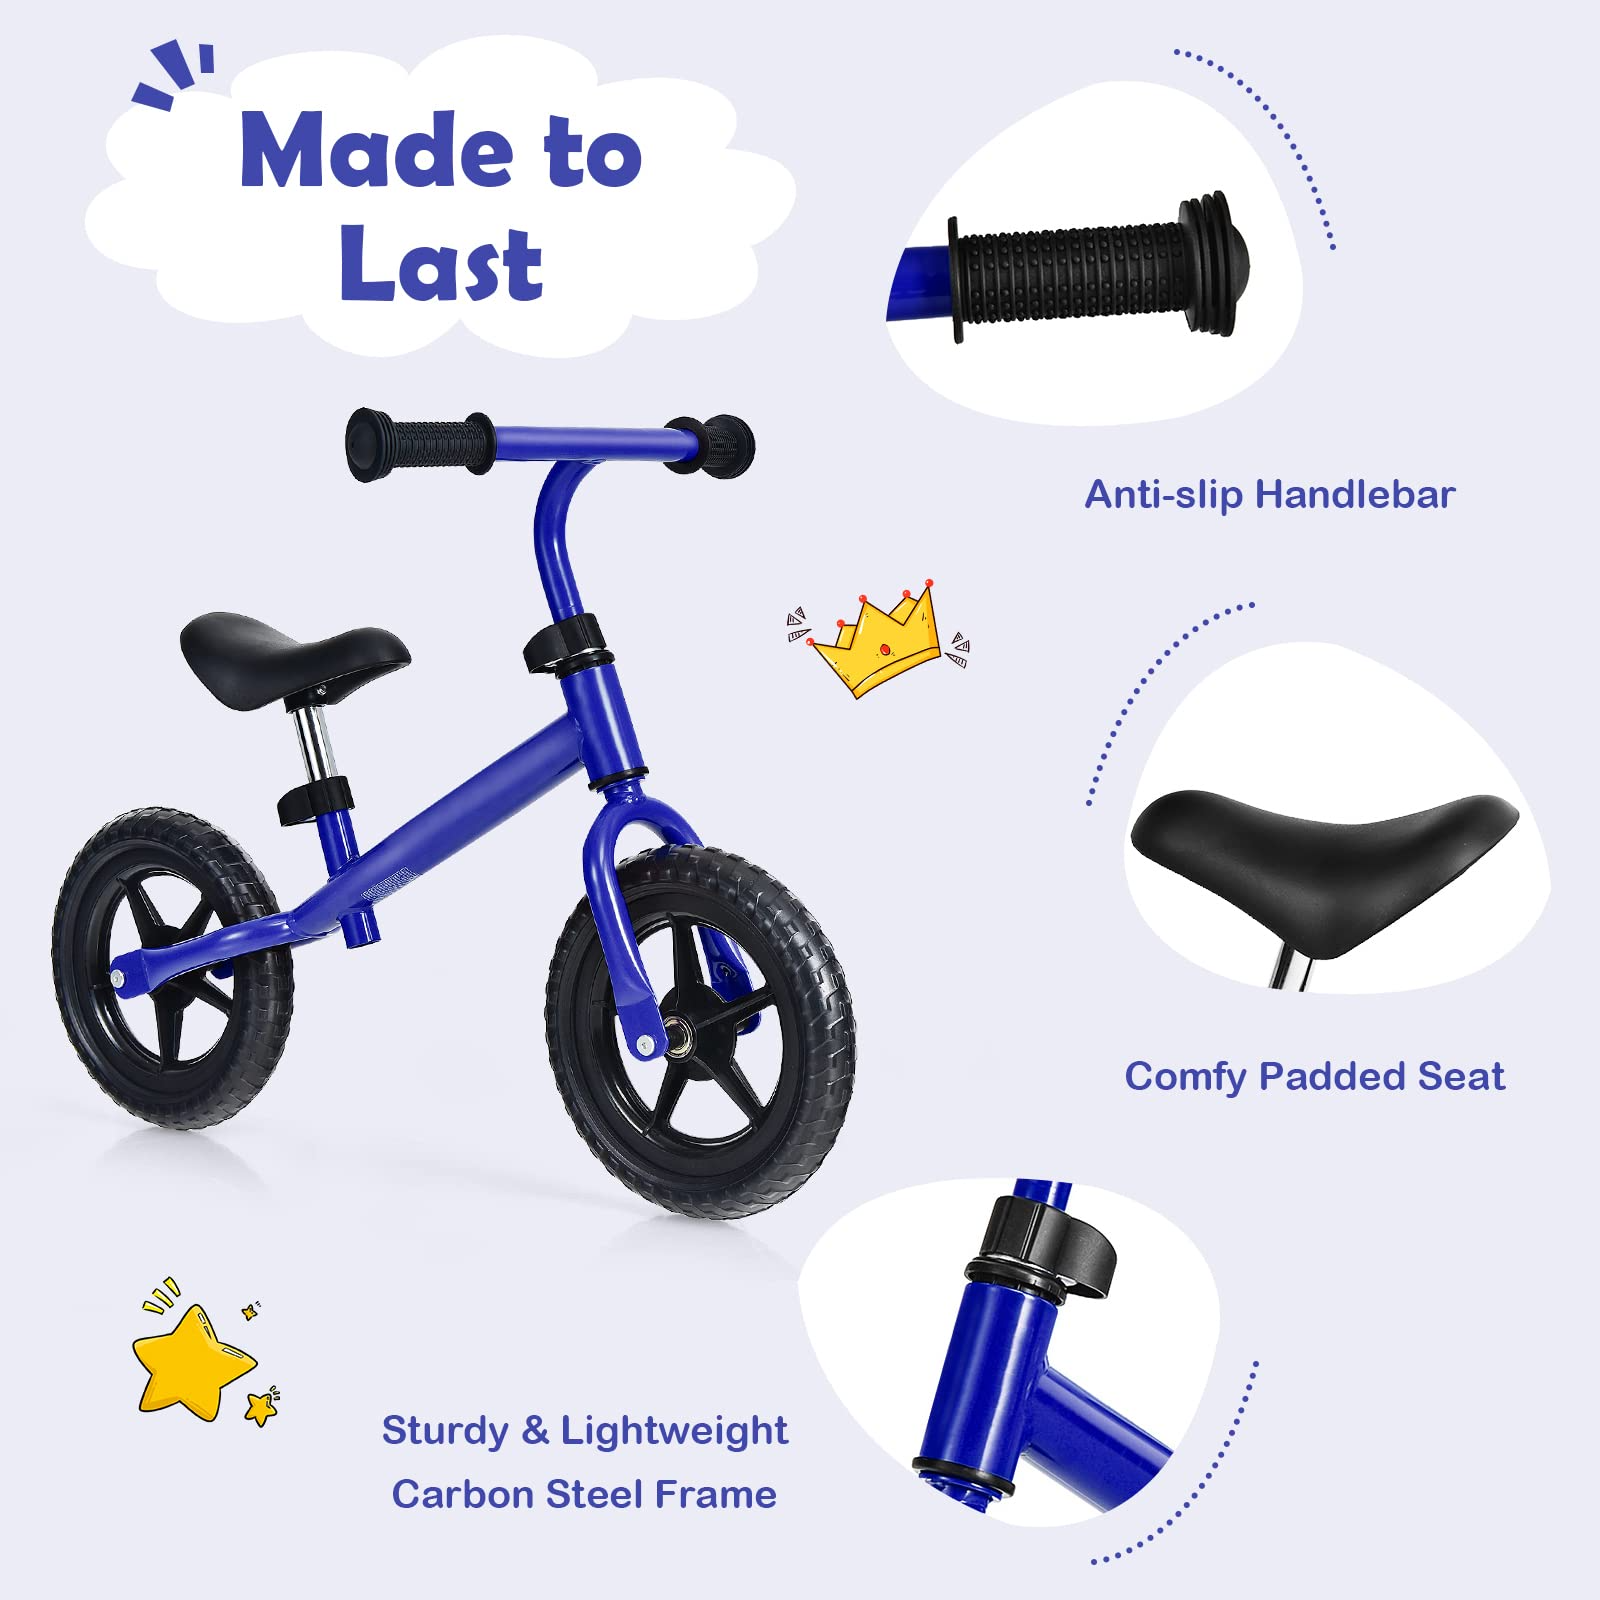 BABY JOY Kids Balance Bike, No Pedal Training Bicycle with Adjustable Handlebar & Seat and Puncture-Proof EVA Tires